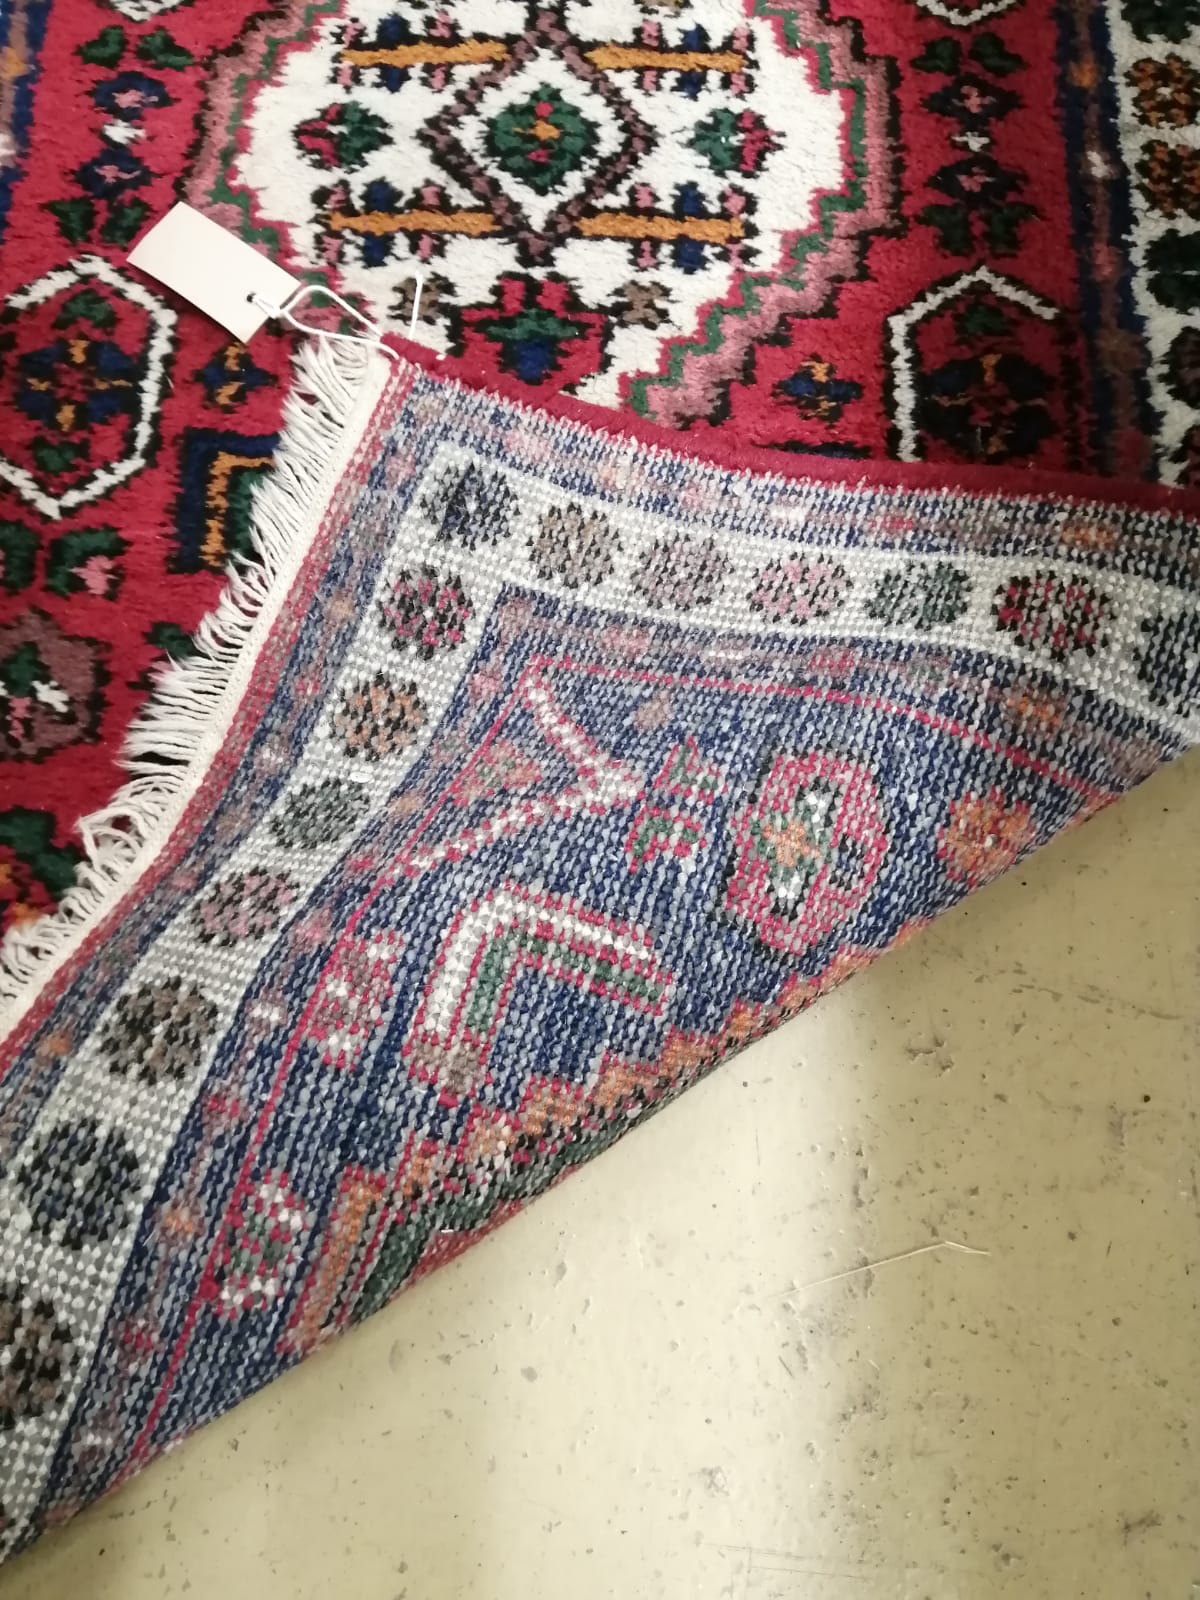 A Caucasian style red ground rug, 130cm x 68cm